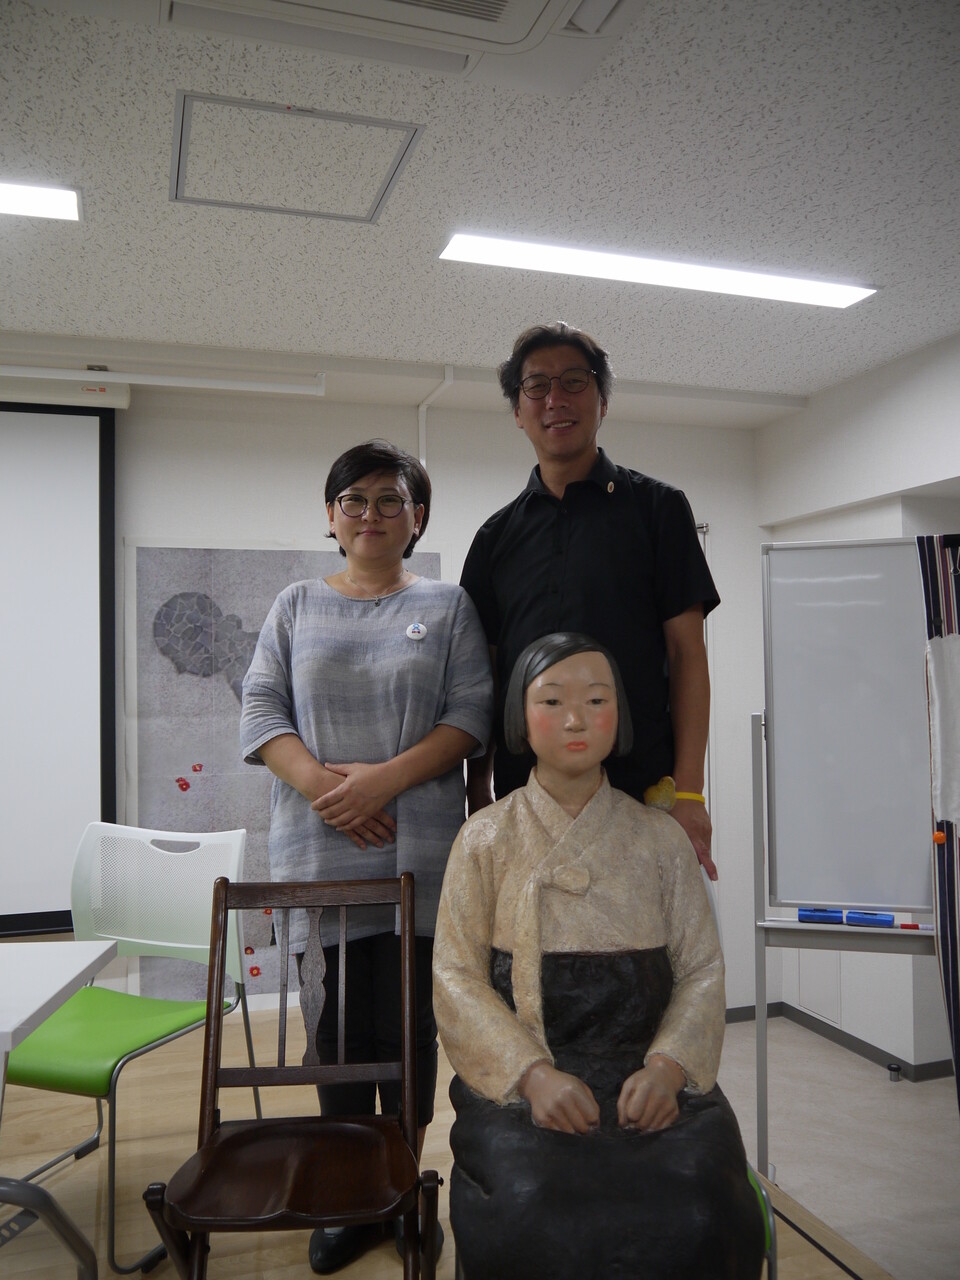 Married artists Kim Seo-kyung (left) and Kim Woon-sung before their Aug. 27 talk in Tokyo titled “The Vietnam Pieta and the Comfort Woman Statue: How Should We Confront Our Country’s Abuses?”